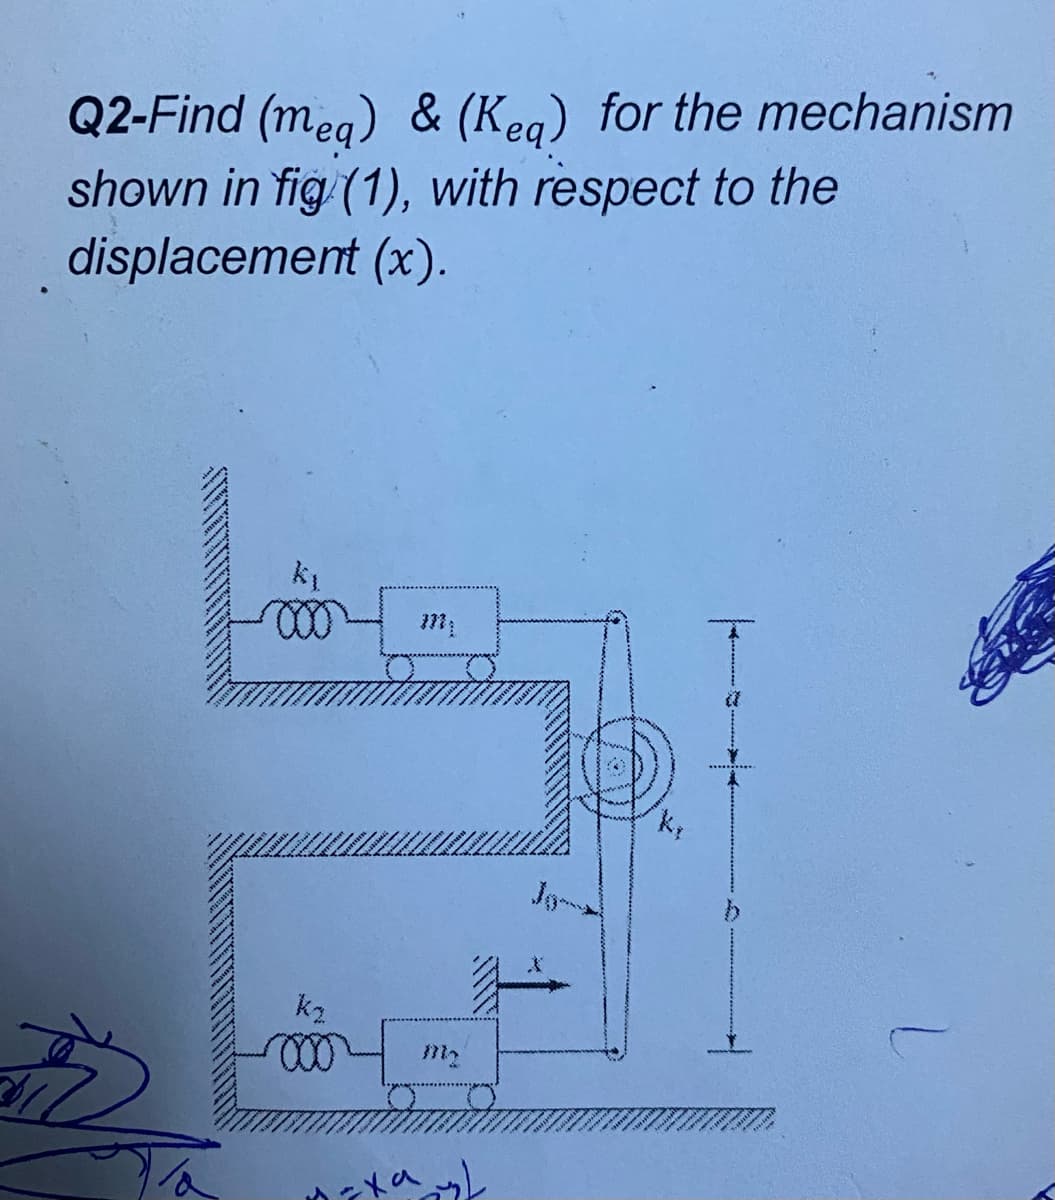 Q2-Find (meg) & (Keg) for the mechanism
shown in fig (1), with respect to the
displacement (x).
Jy
k2
hrtaレ
